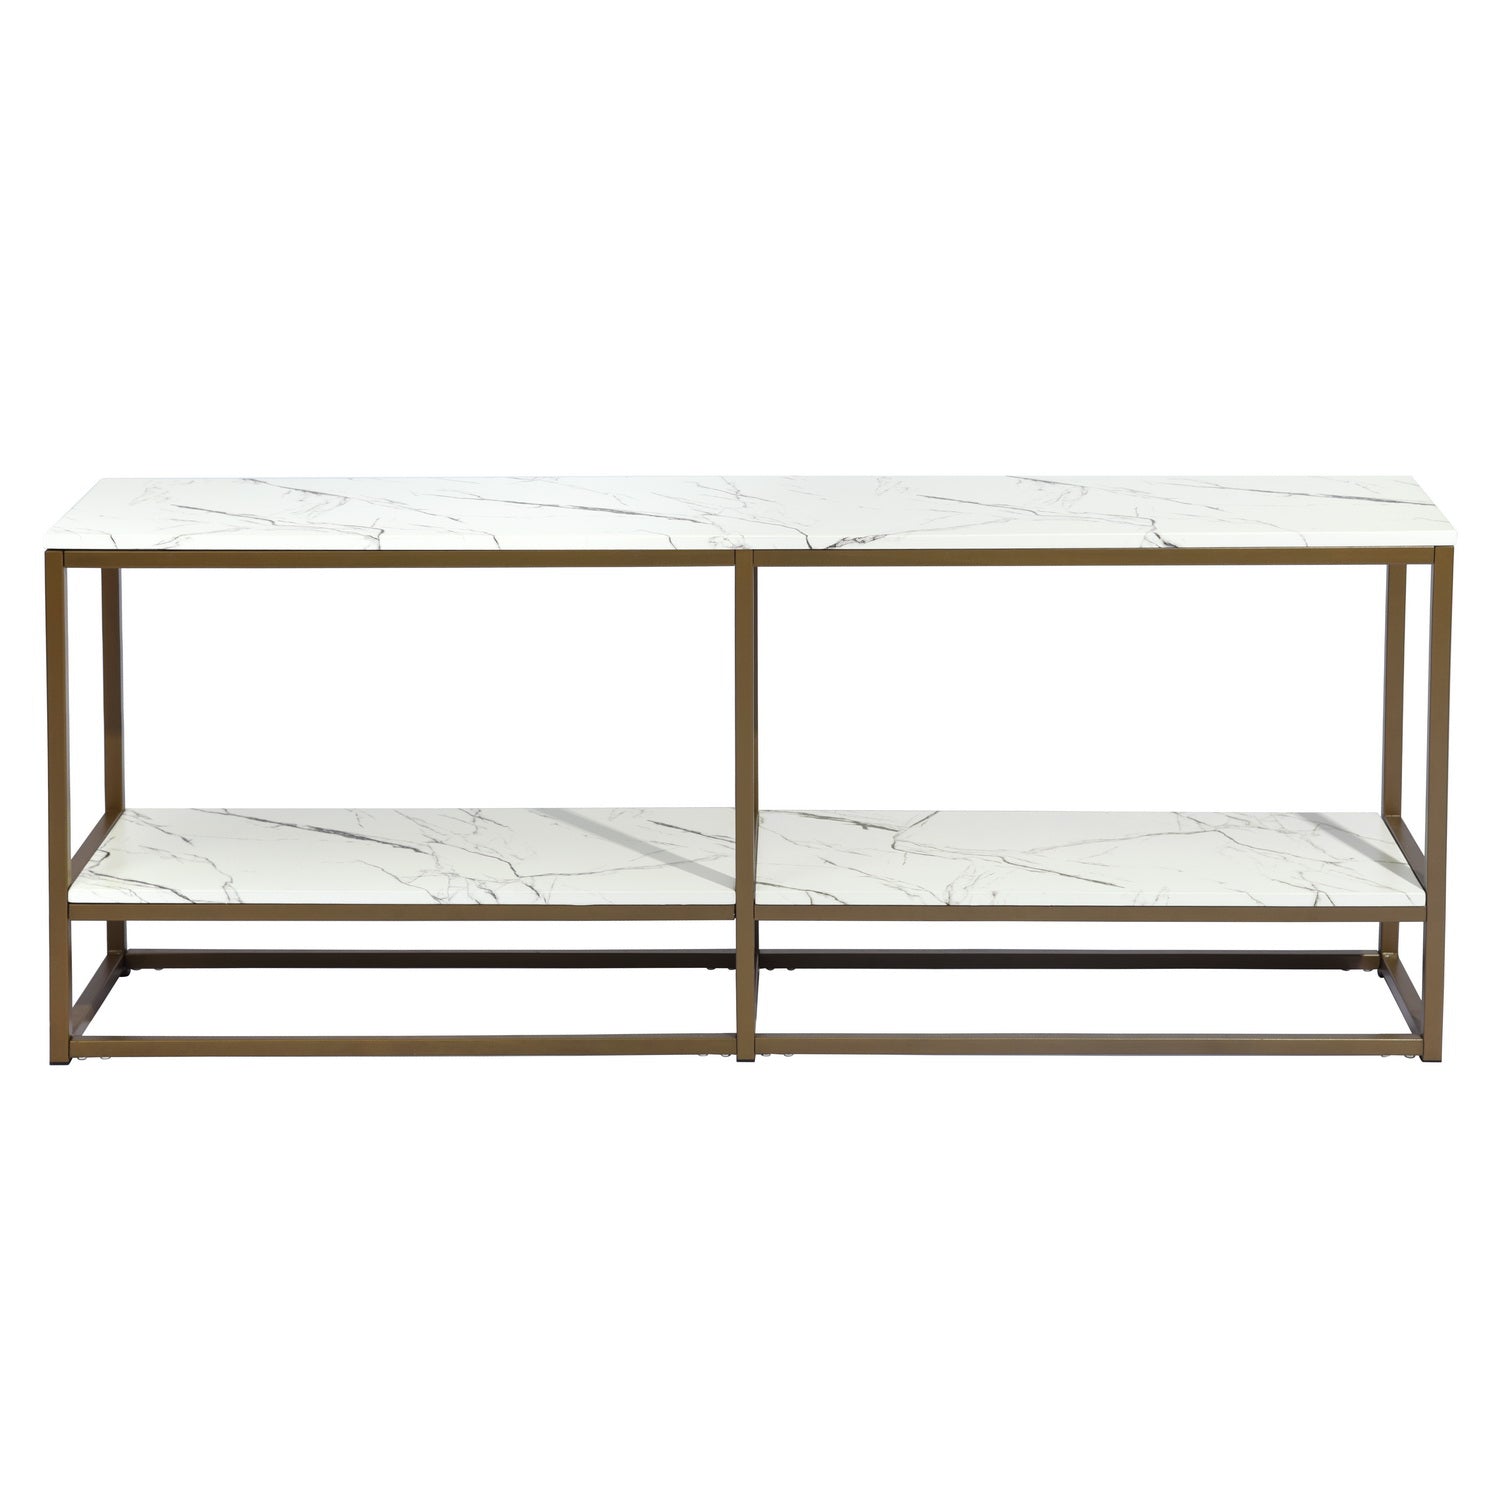 Adria Tv Stand Gold Leg A Tv Stands & Entertainment Centers